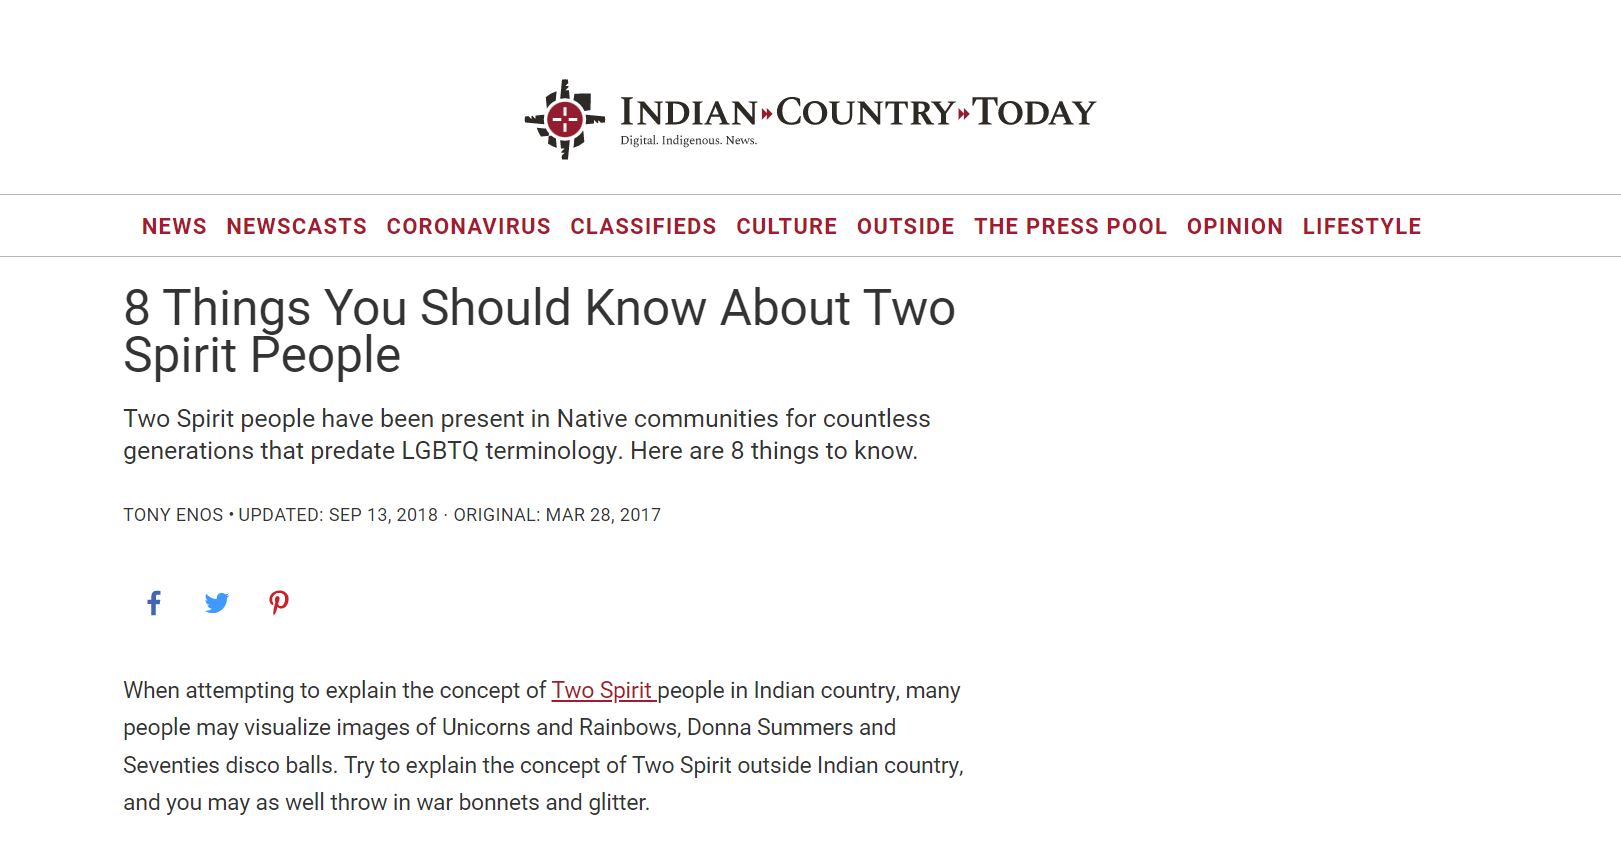 Eight Things You Should Know About Two Spirit People by Indian Country Today 